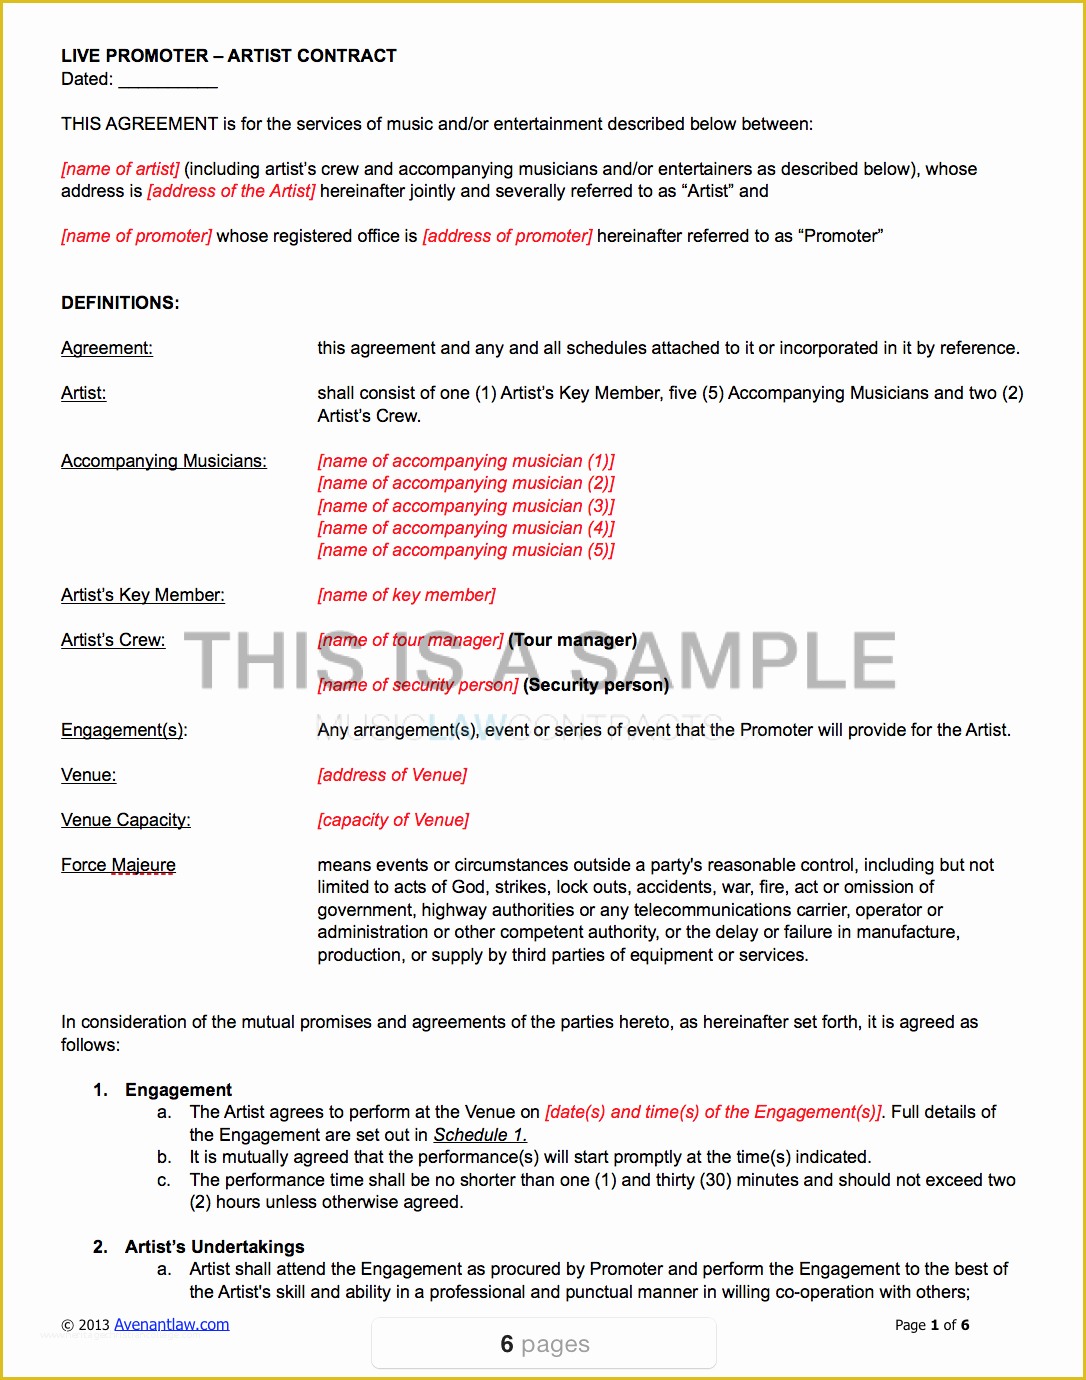 Free Music Performance Contract Templates Of Live Promoter Artist Contract Template